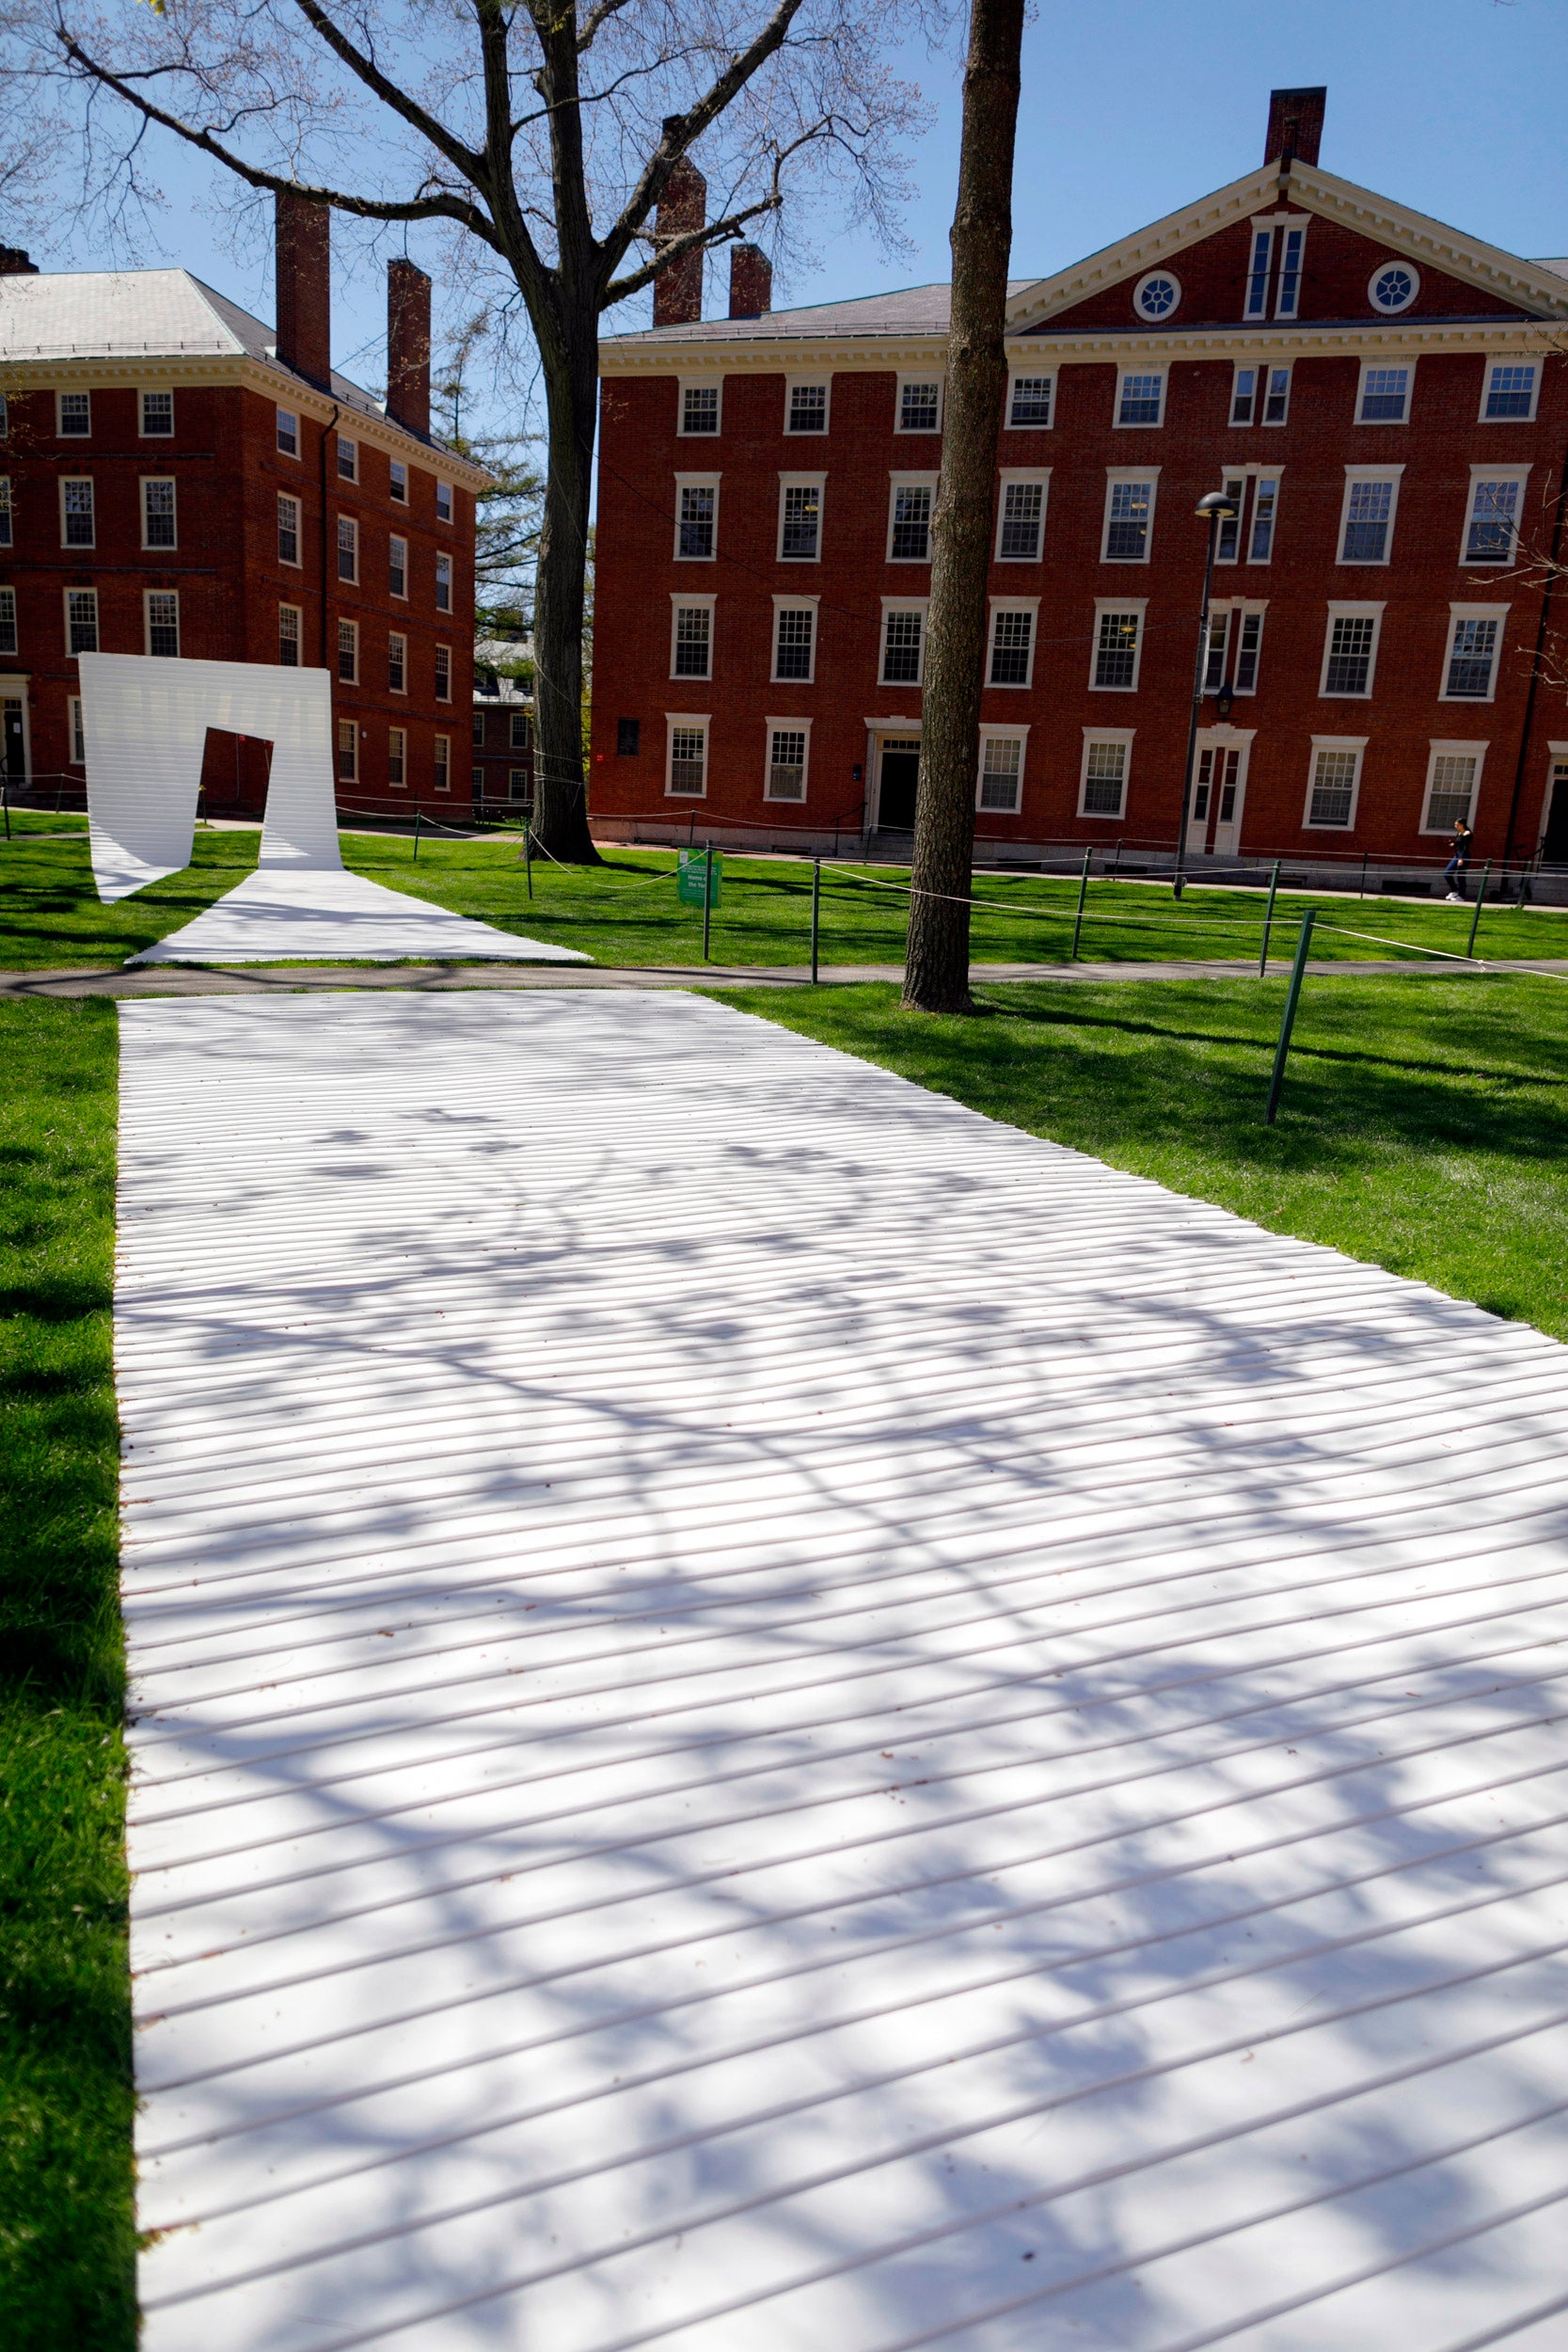 A detail image of a public art installation called “Home on the Yard” by Christian Behling GSD ’24, Ihwa Choi GSD ’24, Monica Mendoza GSD ’24, and Gabriel Schmid GSD ‘24 is pictured in Harvard Yard.